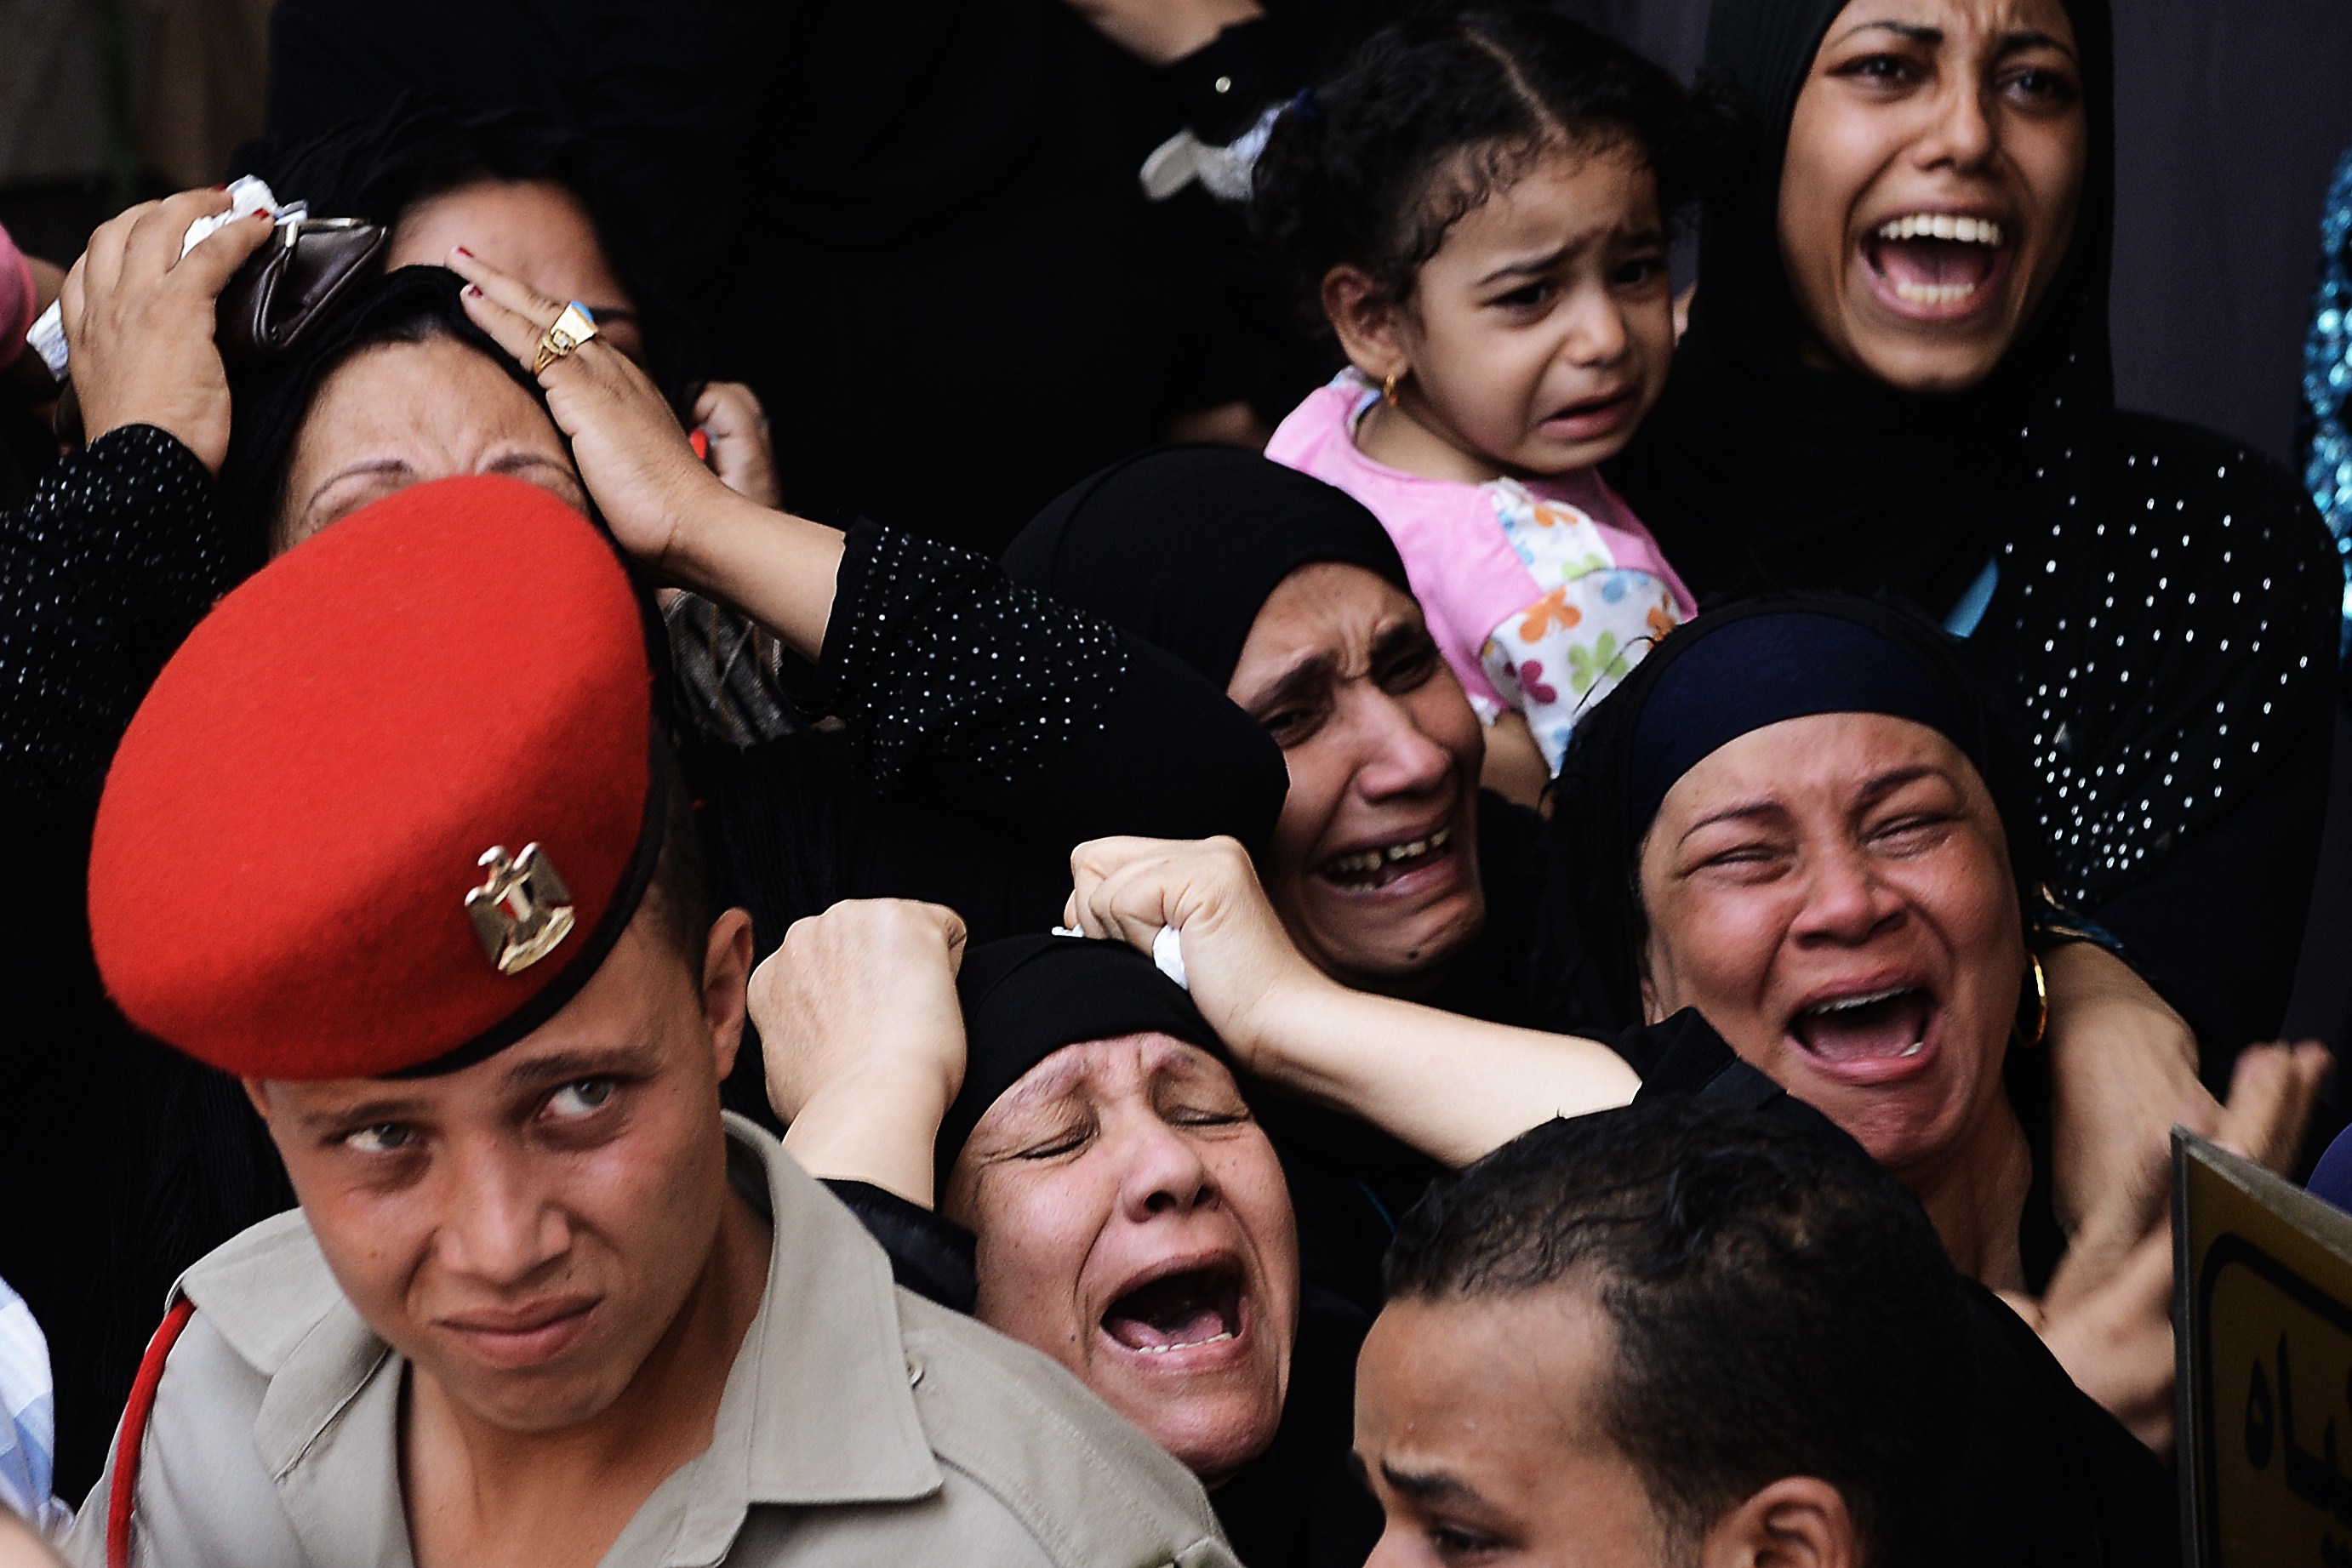 Relatives screams and cry while mourning one of the 16 soldiers killed during an attack on a border crossing post in Northern Sinai, during their funeral on August 7, 2012 in Cairo, Egypt. President Mohamed Morsi ordered security forces to take full control of the Sinai Peninsula and Egypt's army vowed to "avenge" the killings, in which 35 gunmen in Bedouin clothing opened fire on the troops before crossing into the Jewish state in an armoured vehicle, killing five on their side according to the Israelis. AFP PHOTO/GIANLUIGI GUERCIA